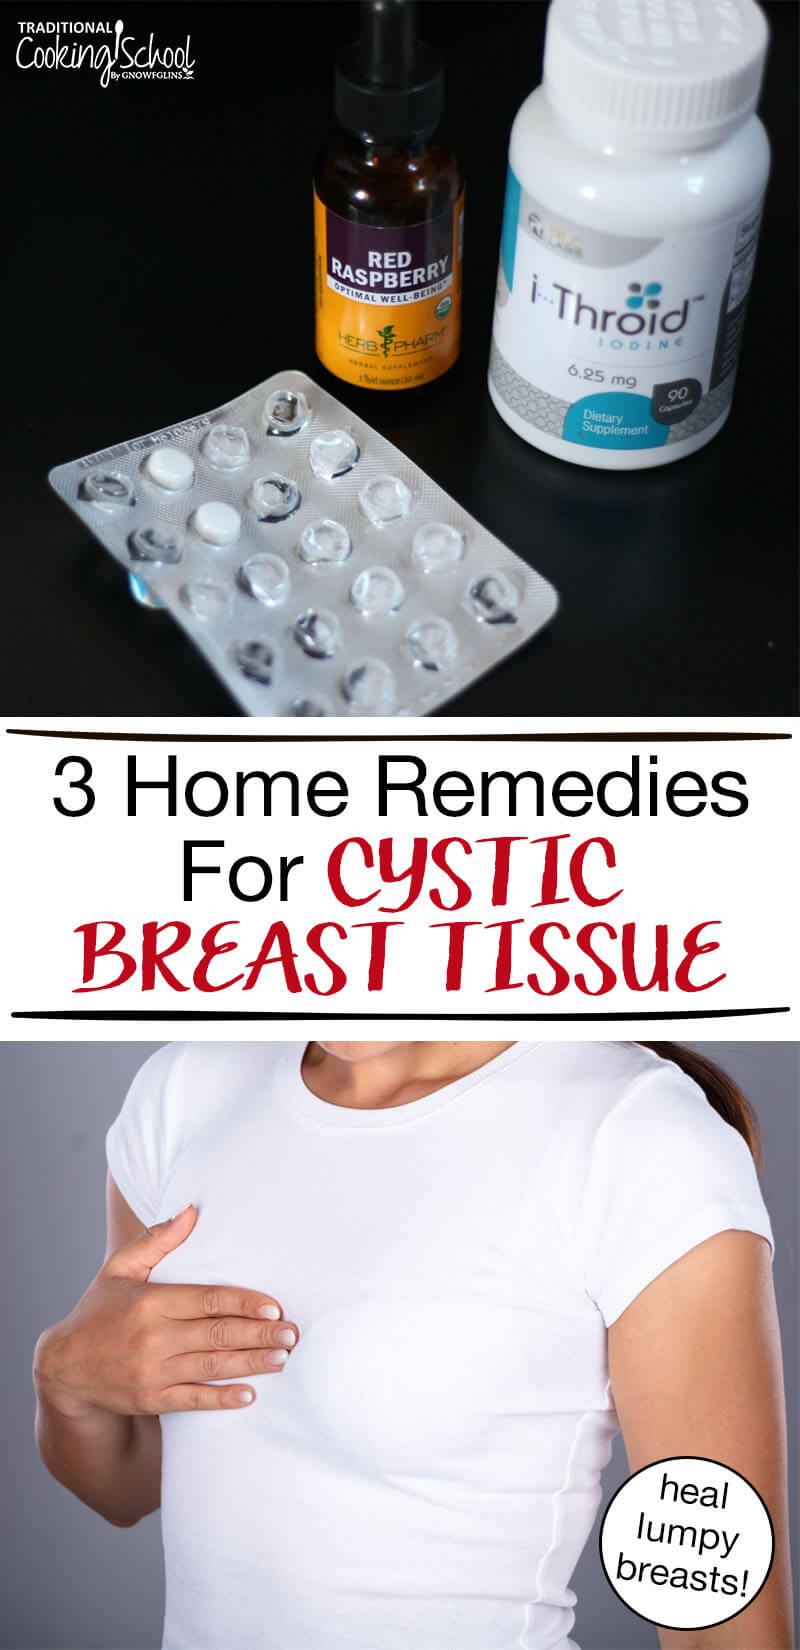 3 Home Remedies For Cystic Breast Tissue | Do you have the lumps and pain of fibrocystic breast tissue? Did you know that this lumpy breast tissue can make it difficult to find potentially cancerous lumps when doing self breast exams? Here are 3 home remedies for cystic breast tissue to heal lumpy breasts. | TraditionalCookingSchool.com